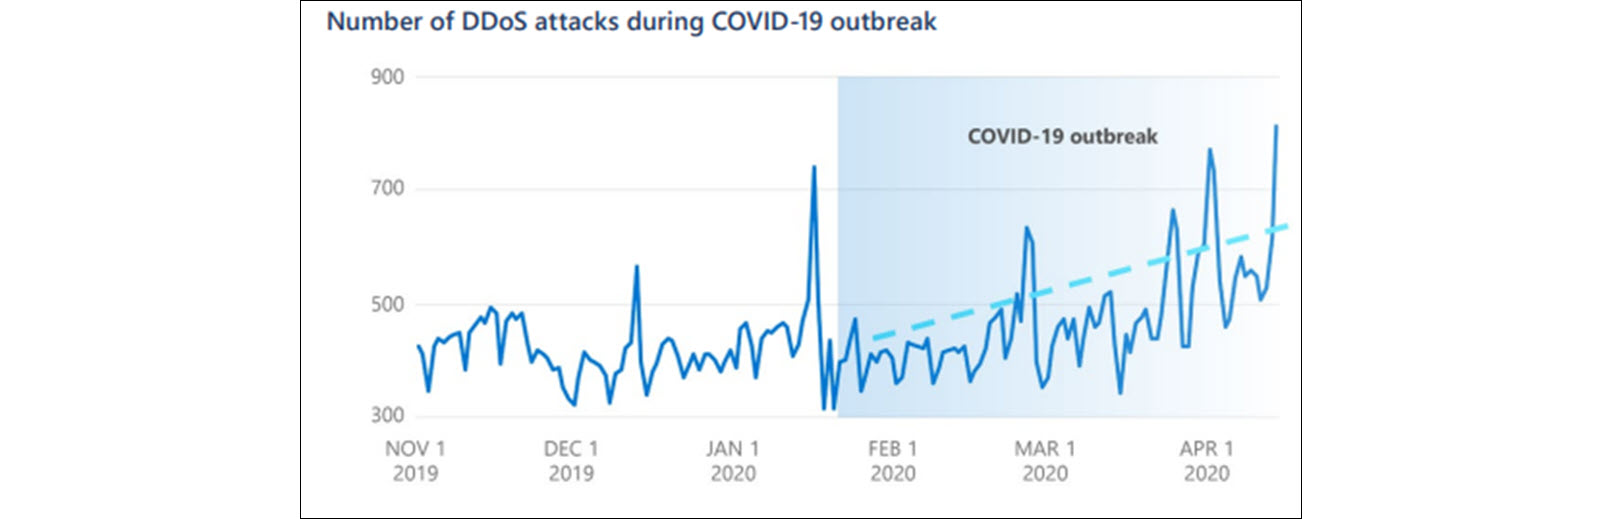 Image. Graph showing the trend in DDoS attacks during the COVID-19 pandemic according to Microsoft.